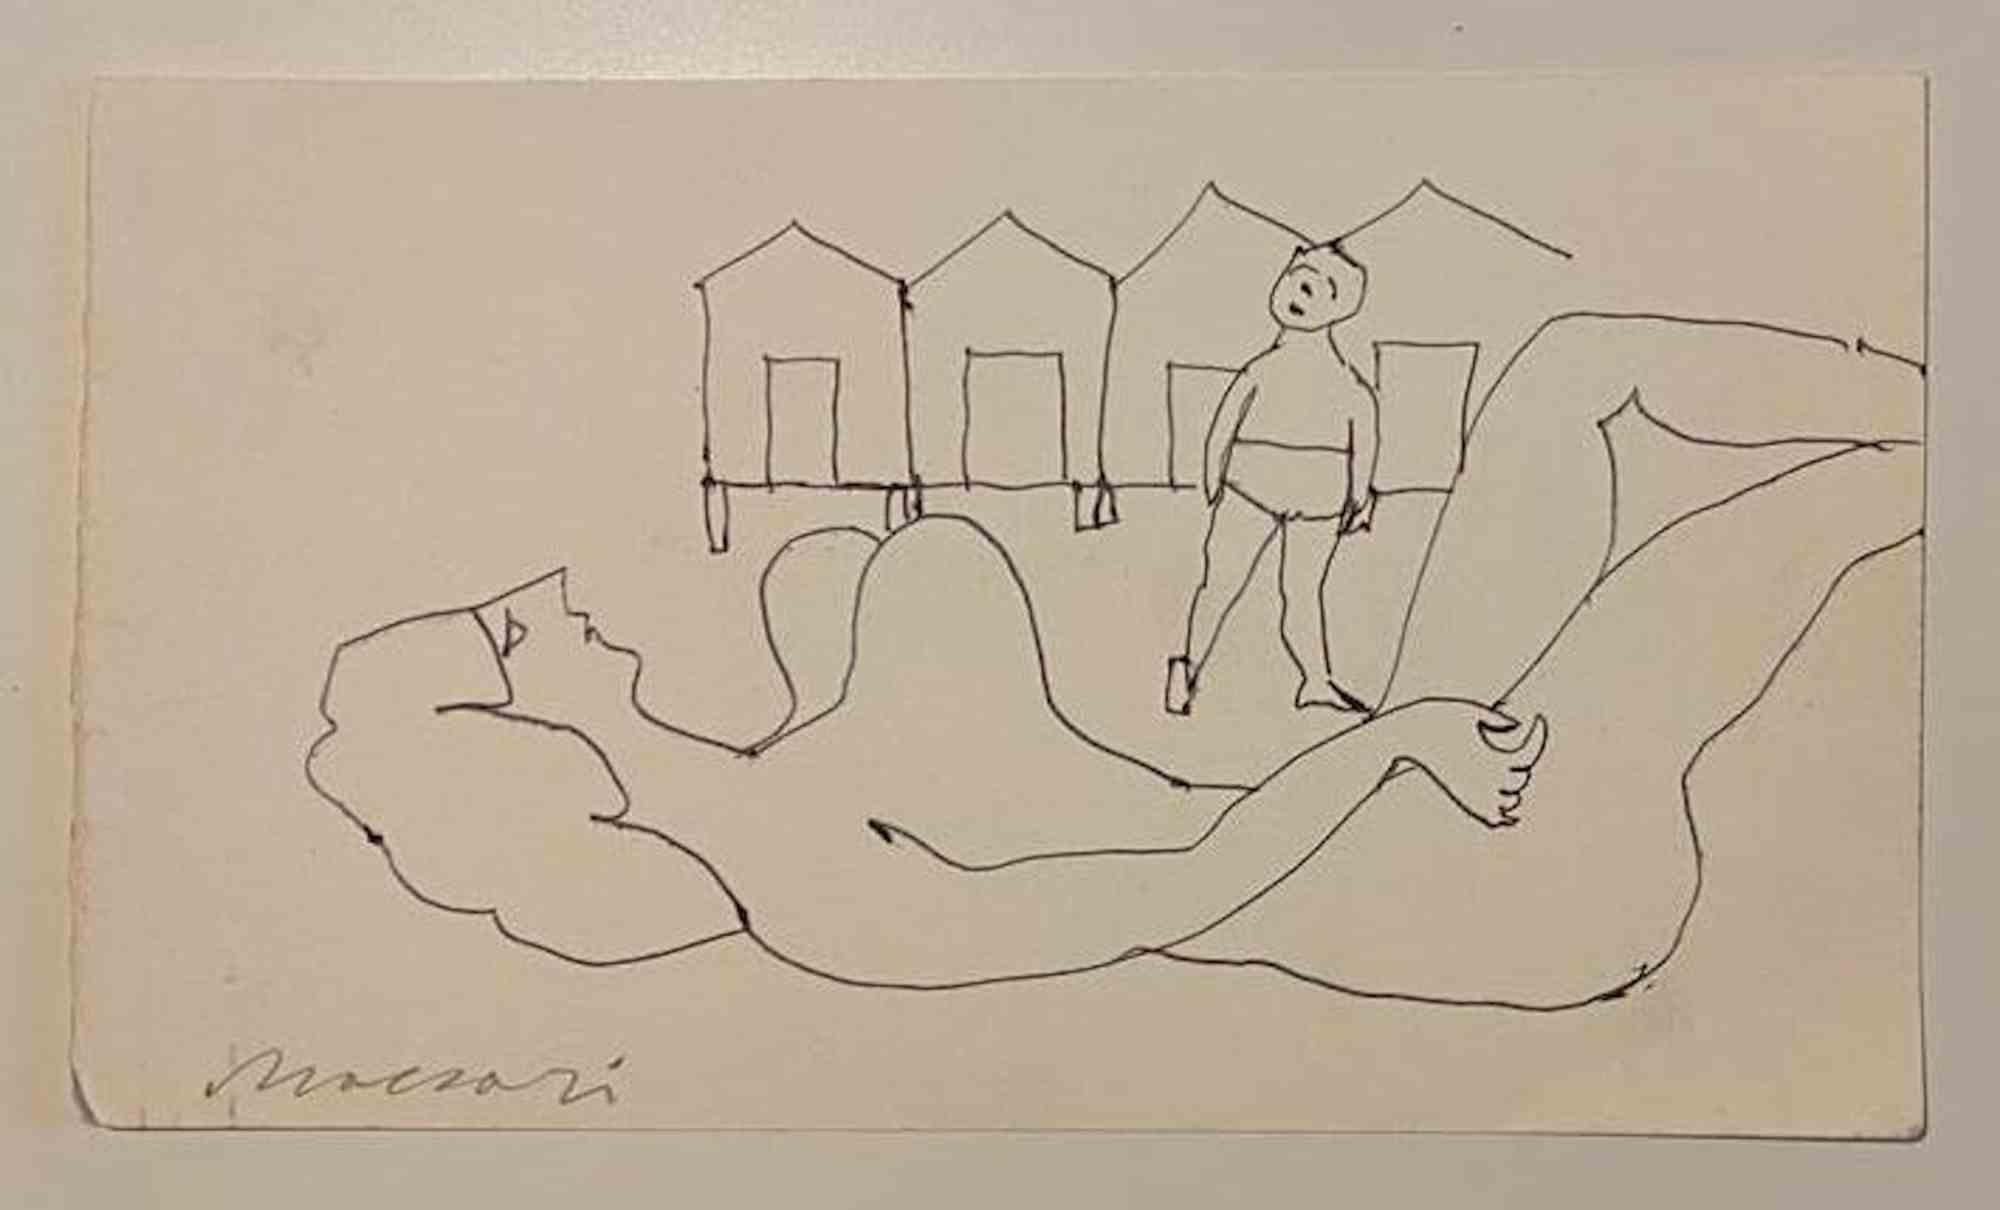 At the Beach is a Pen Drawing realized by Mino Maccari  (1924-1989) in the Mid-20th Century.

Hand-signed on the lower.

Good conditions.

Mino Maccari (Siena, 1924-Rome, June 16, 1989) was an Italian writer, painter, engraver and journalist, winner